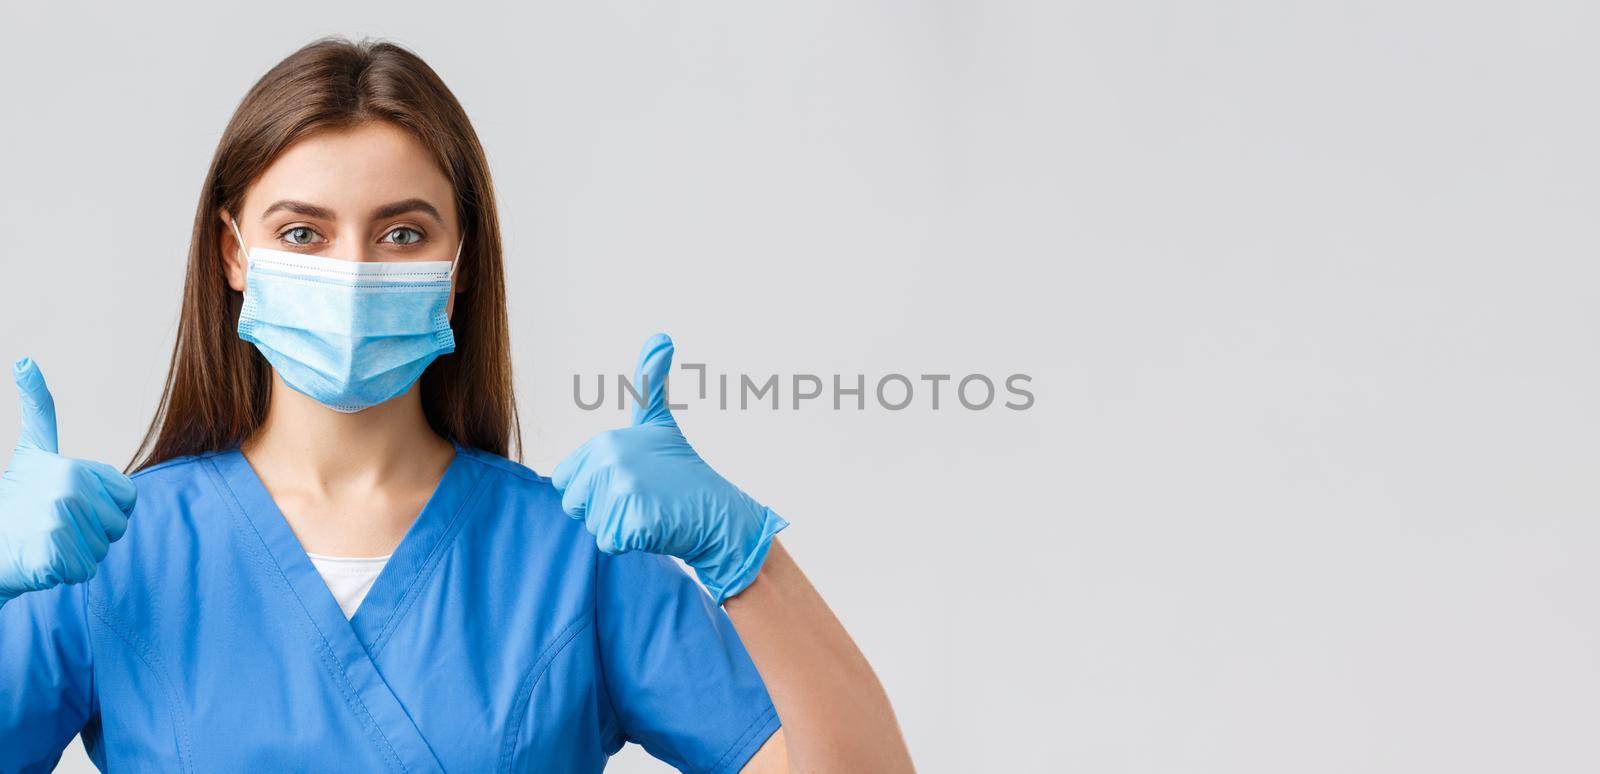 Covid-19, preventing virus, health, healthcare workers and quarantine concept. Close-up of supportive female nurse or doctor in blue scrubs, medical mask and gloves, thumbs-up in approval.